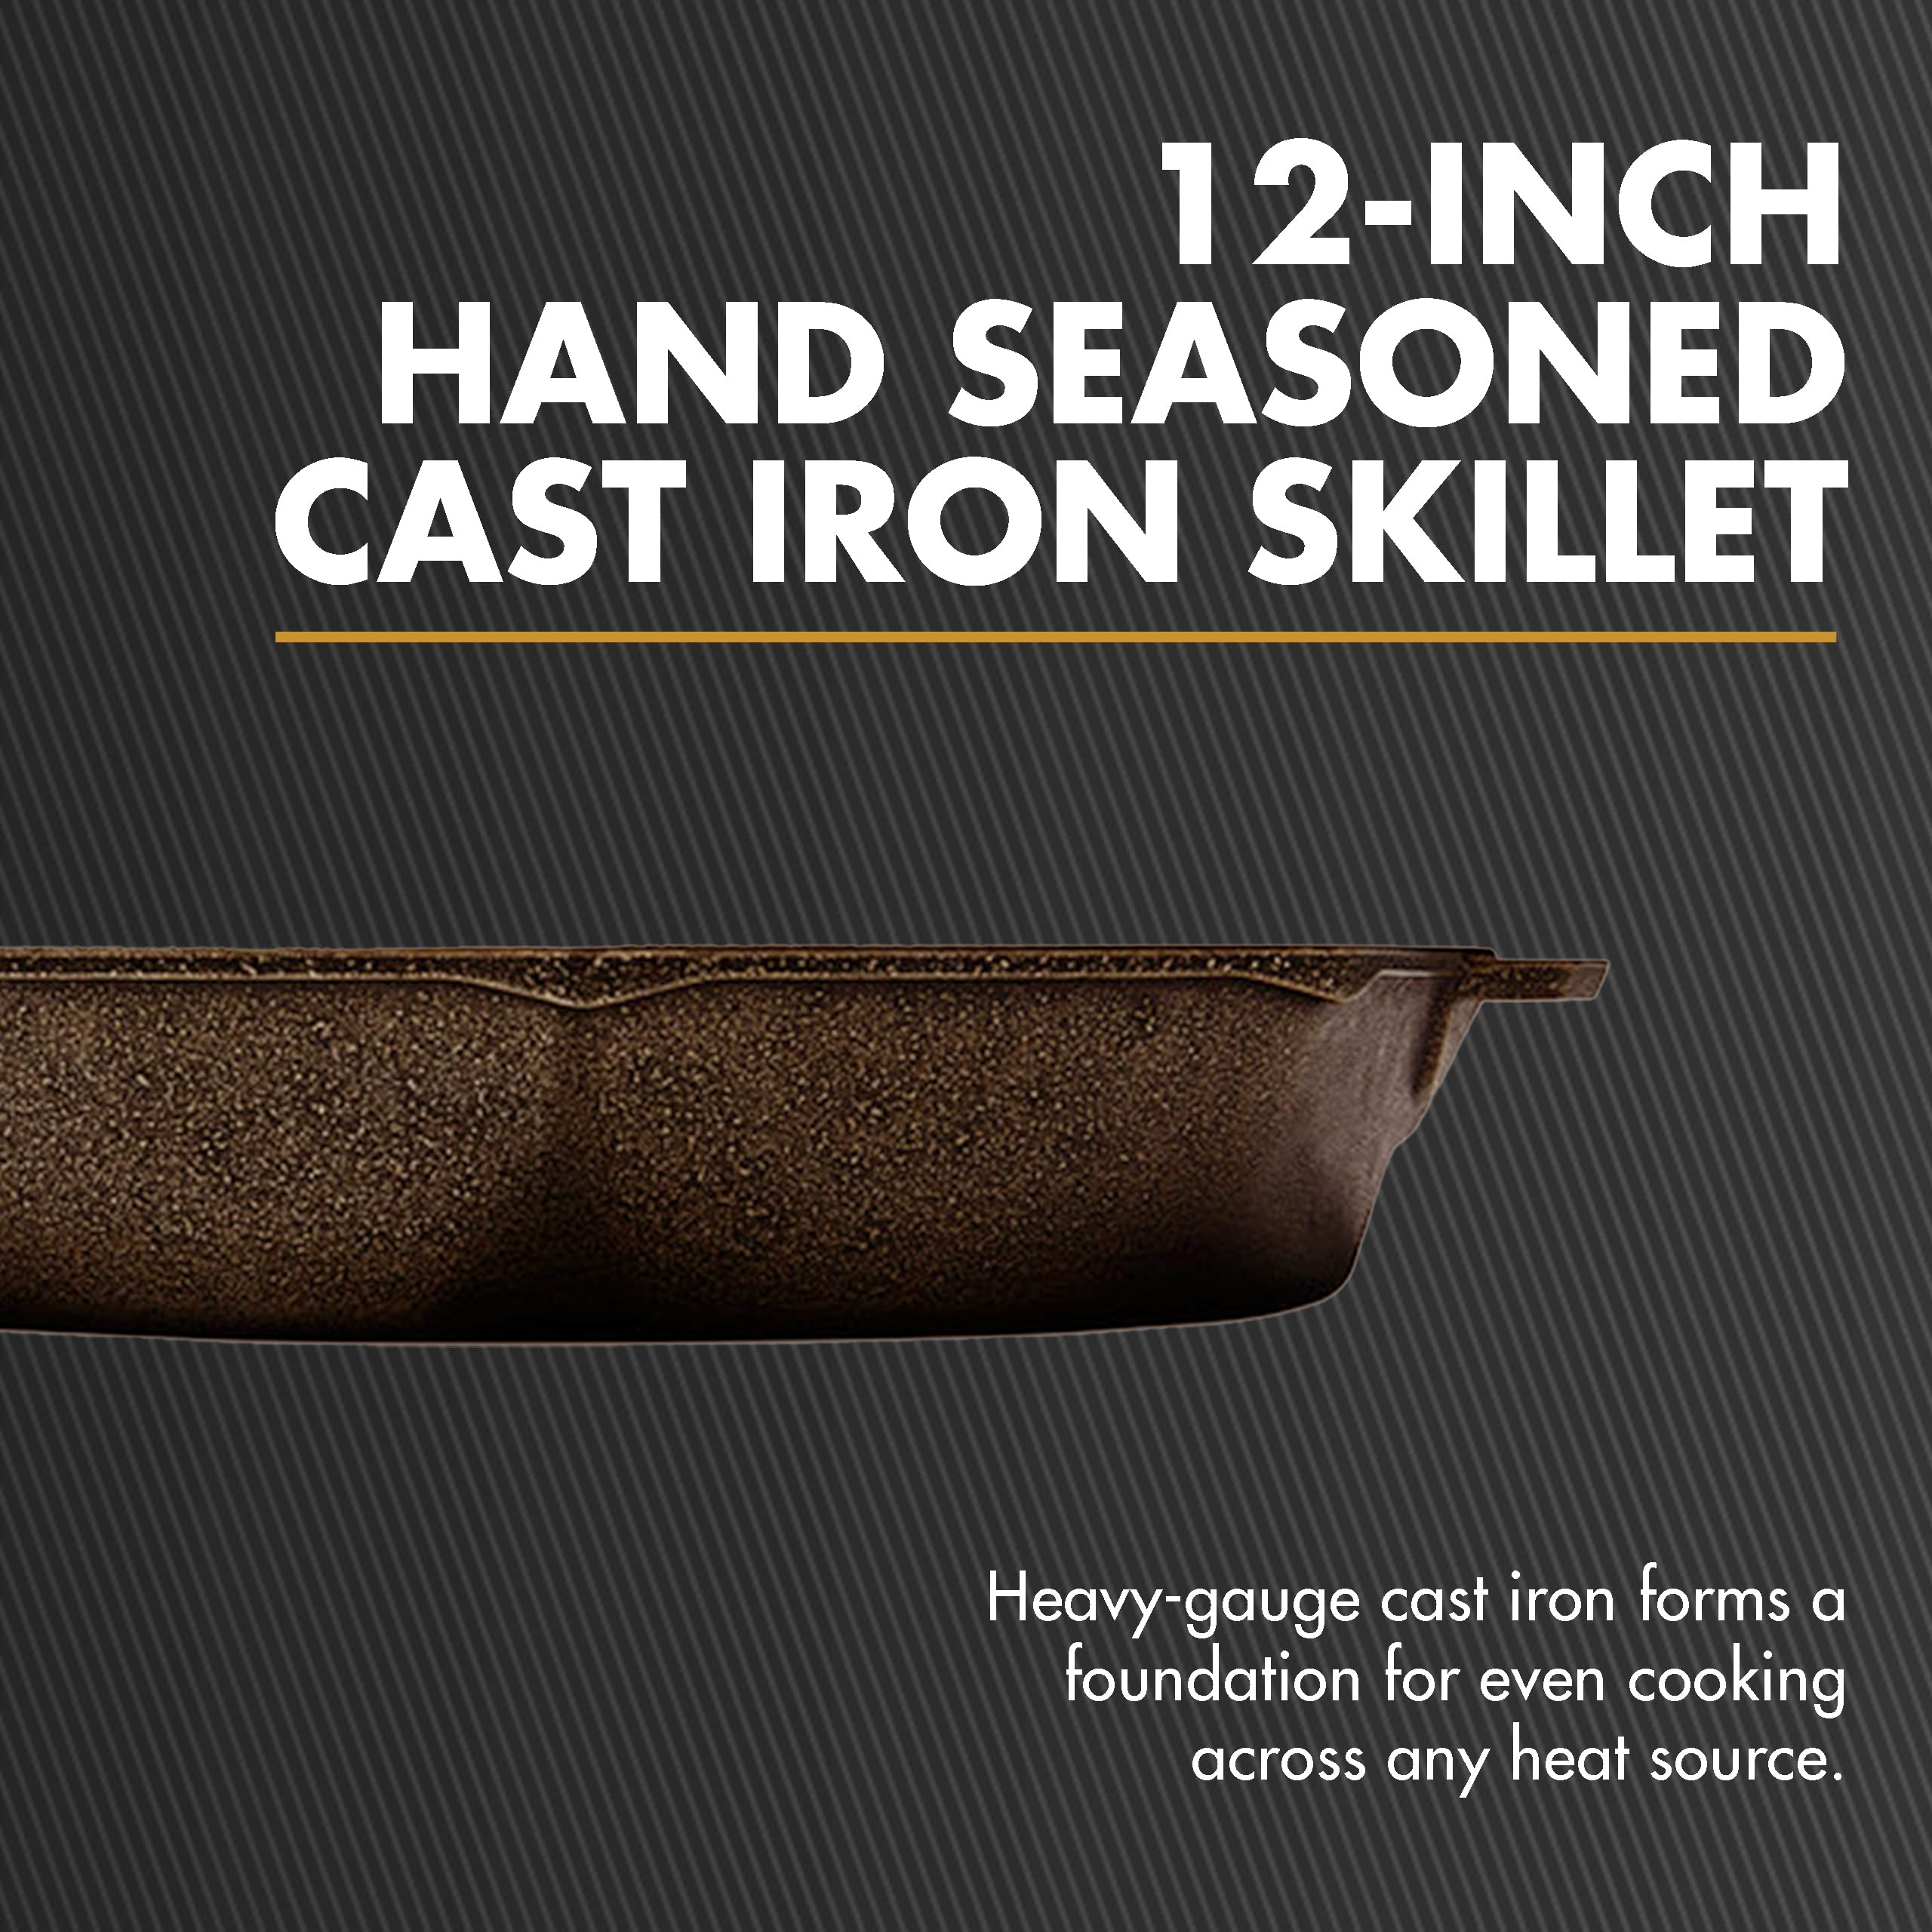 FINEX 12" Cast Iron Skillet, Modern Heirloom, Handcrafted in The USA, Pre-Seasoned with Organic Flaxseed Oil